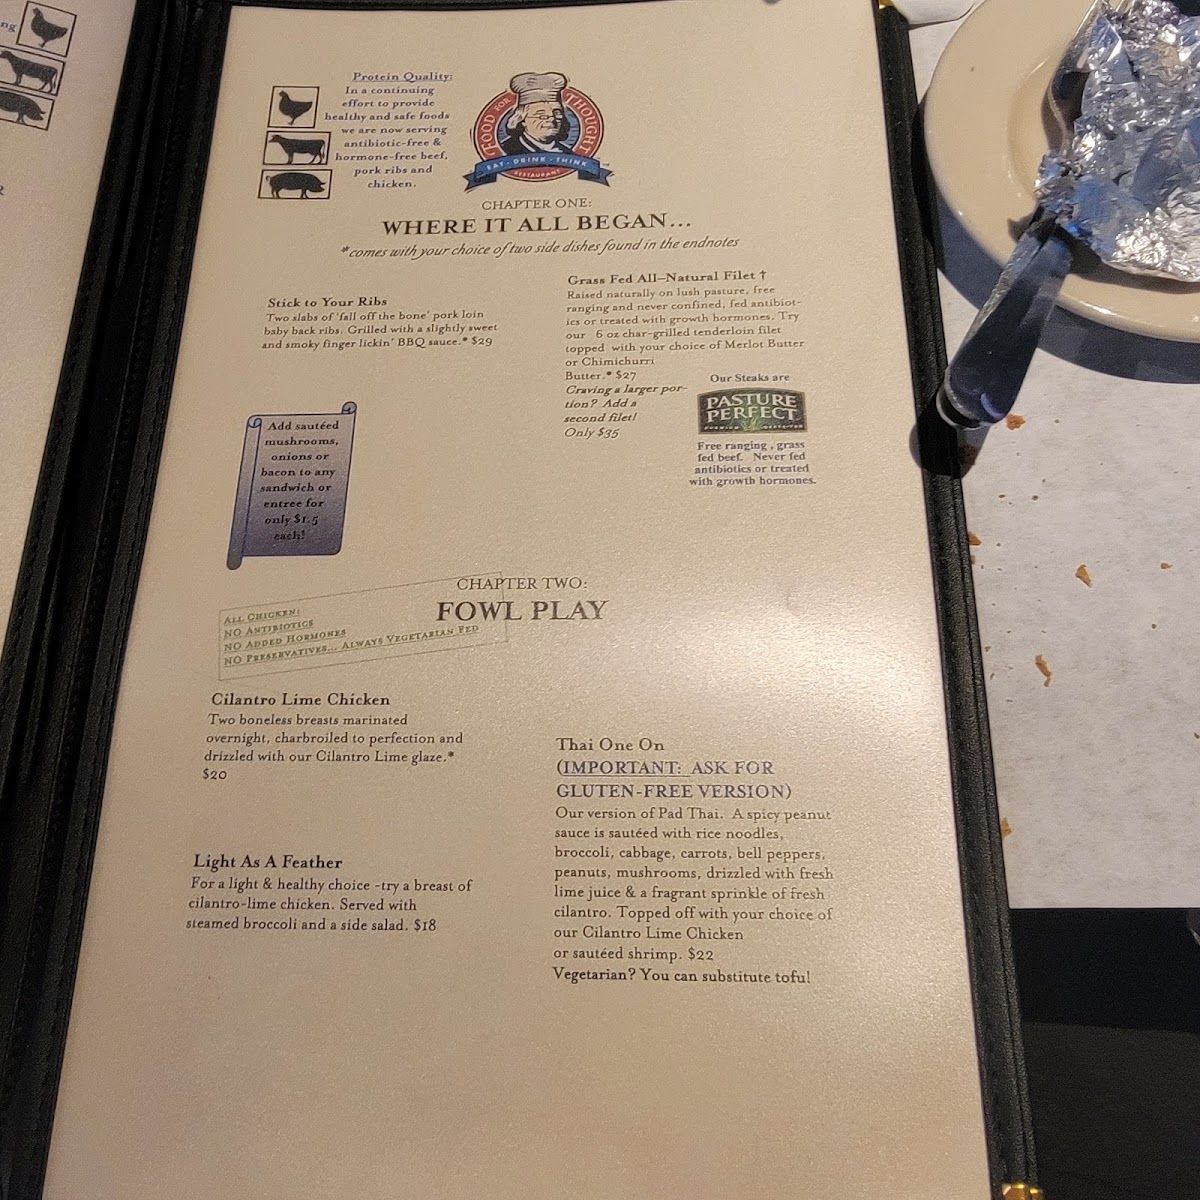 Food for Thought gluten-free menu